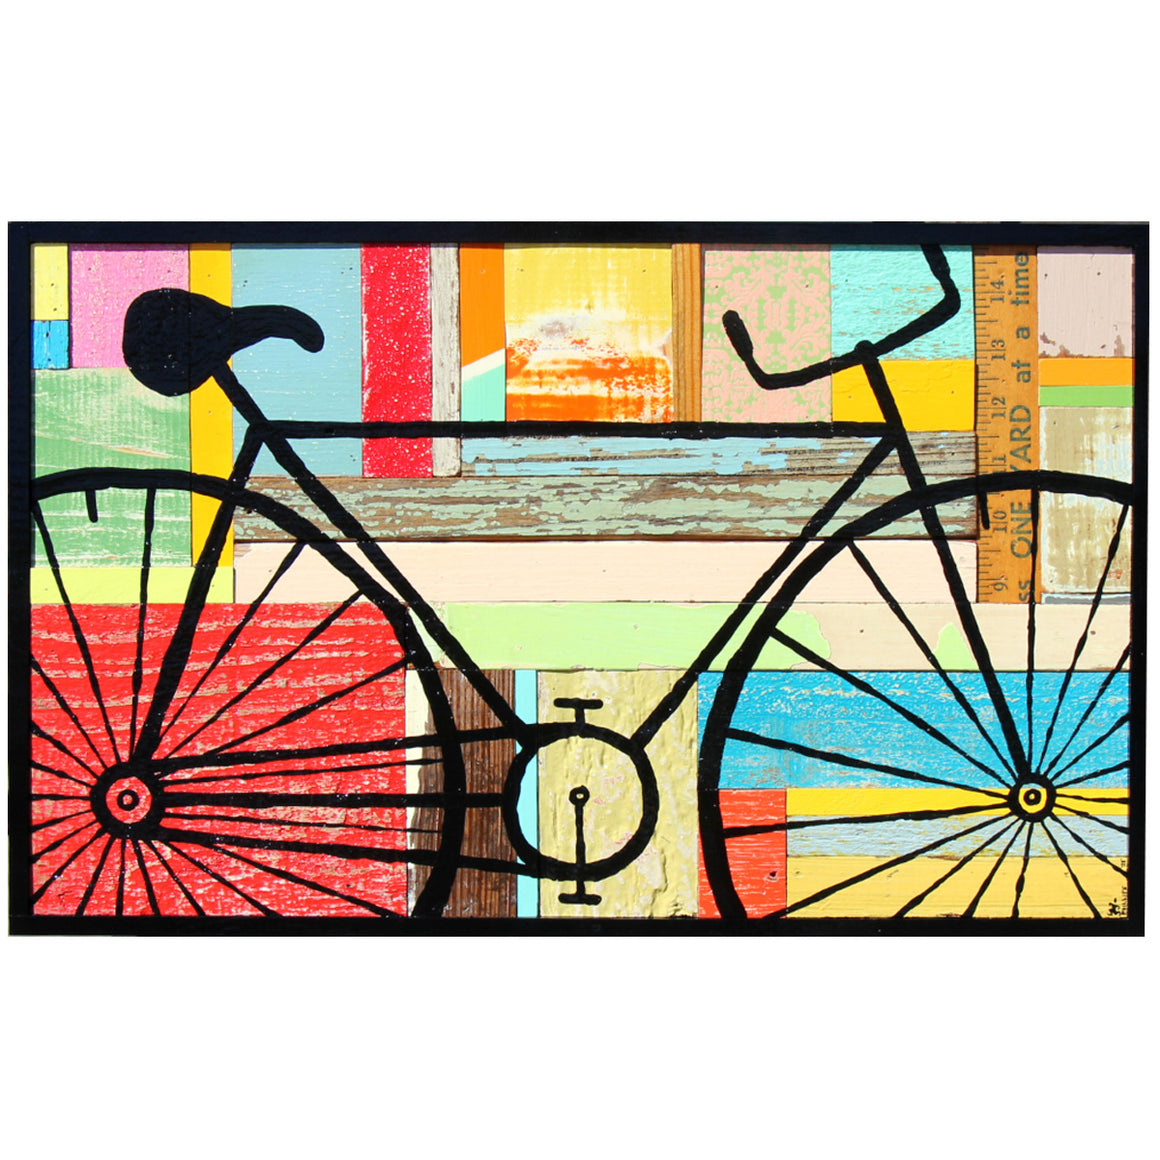 I Once Named My Bike 'Calgon' So I Could Yell "Calgon! Take Me Away!" As I Rode Off  - Brian Phillips - 20x12.25"